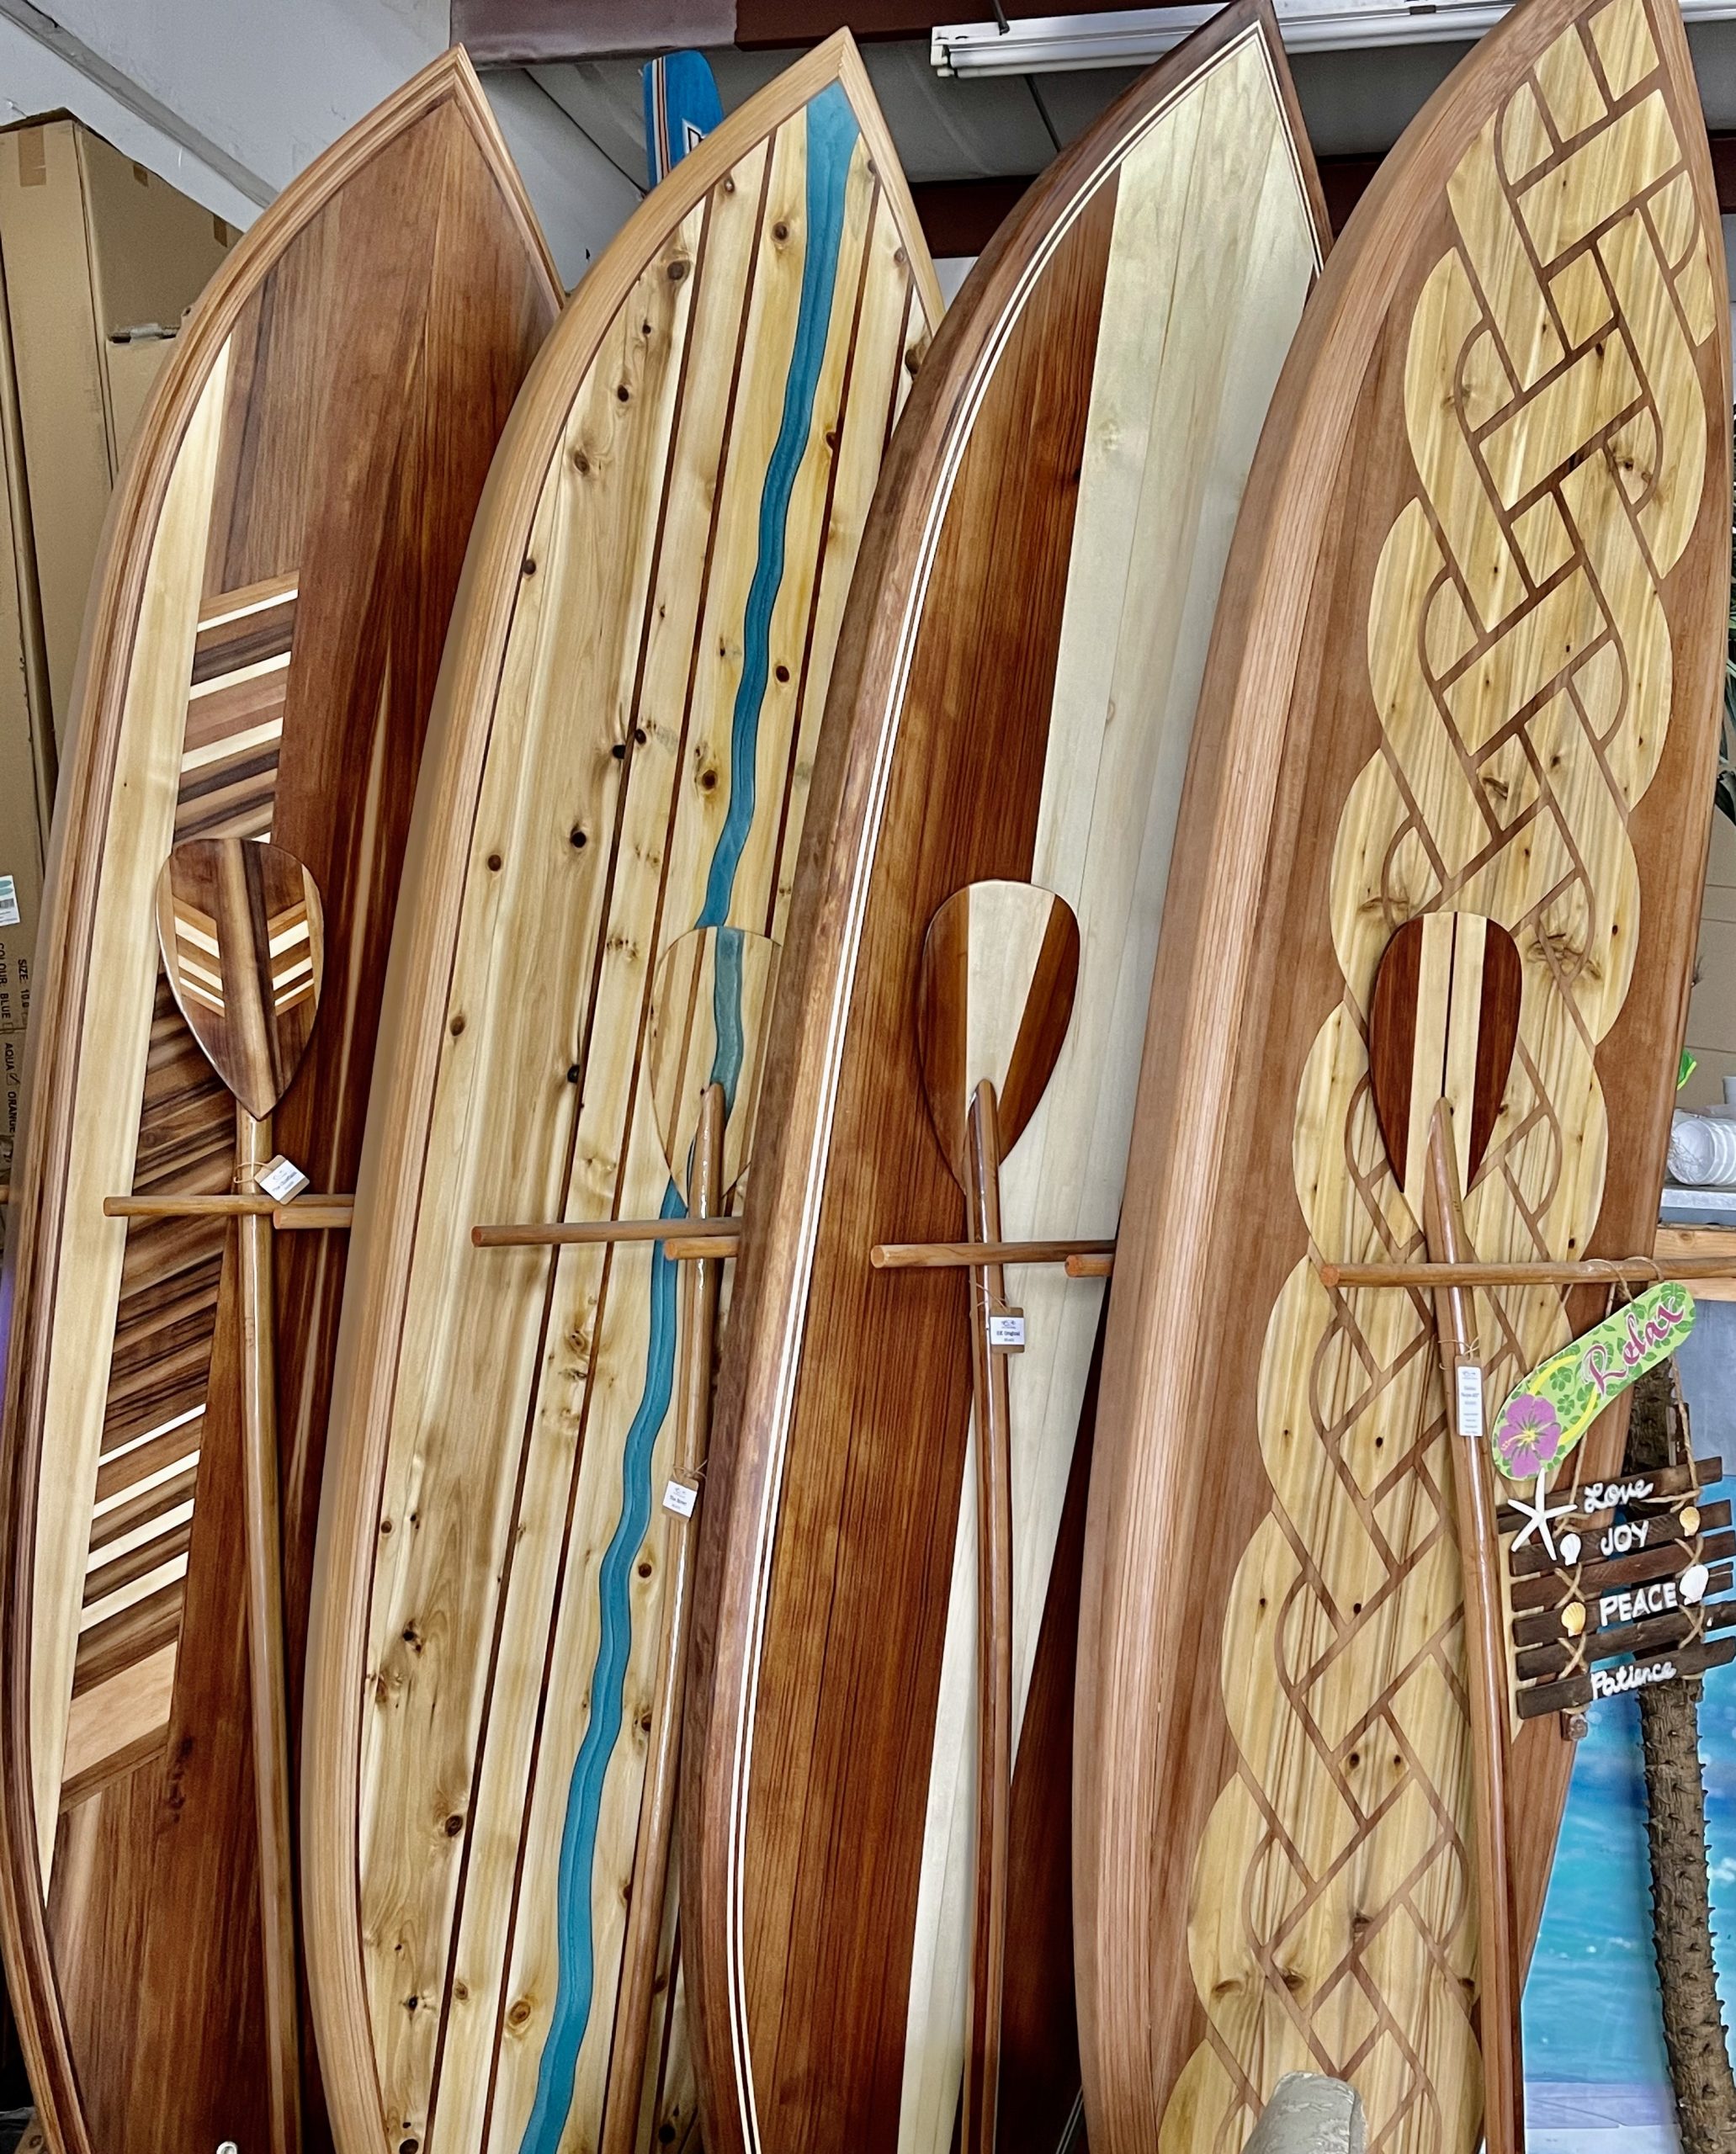 HAND MADE HALLOW WOOD PADDLE BOARDS BY LITTLE BAY BOARDS AT SOBE SURF & PADDLE